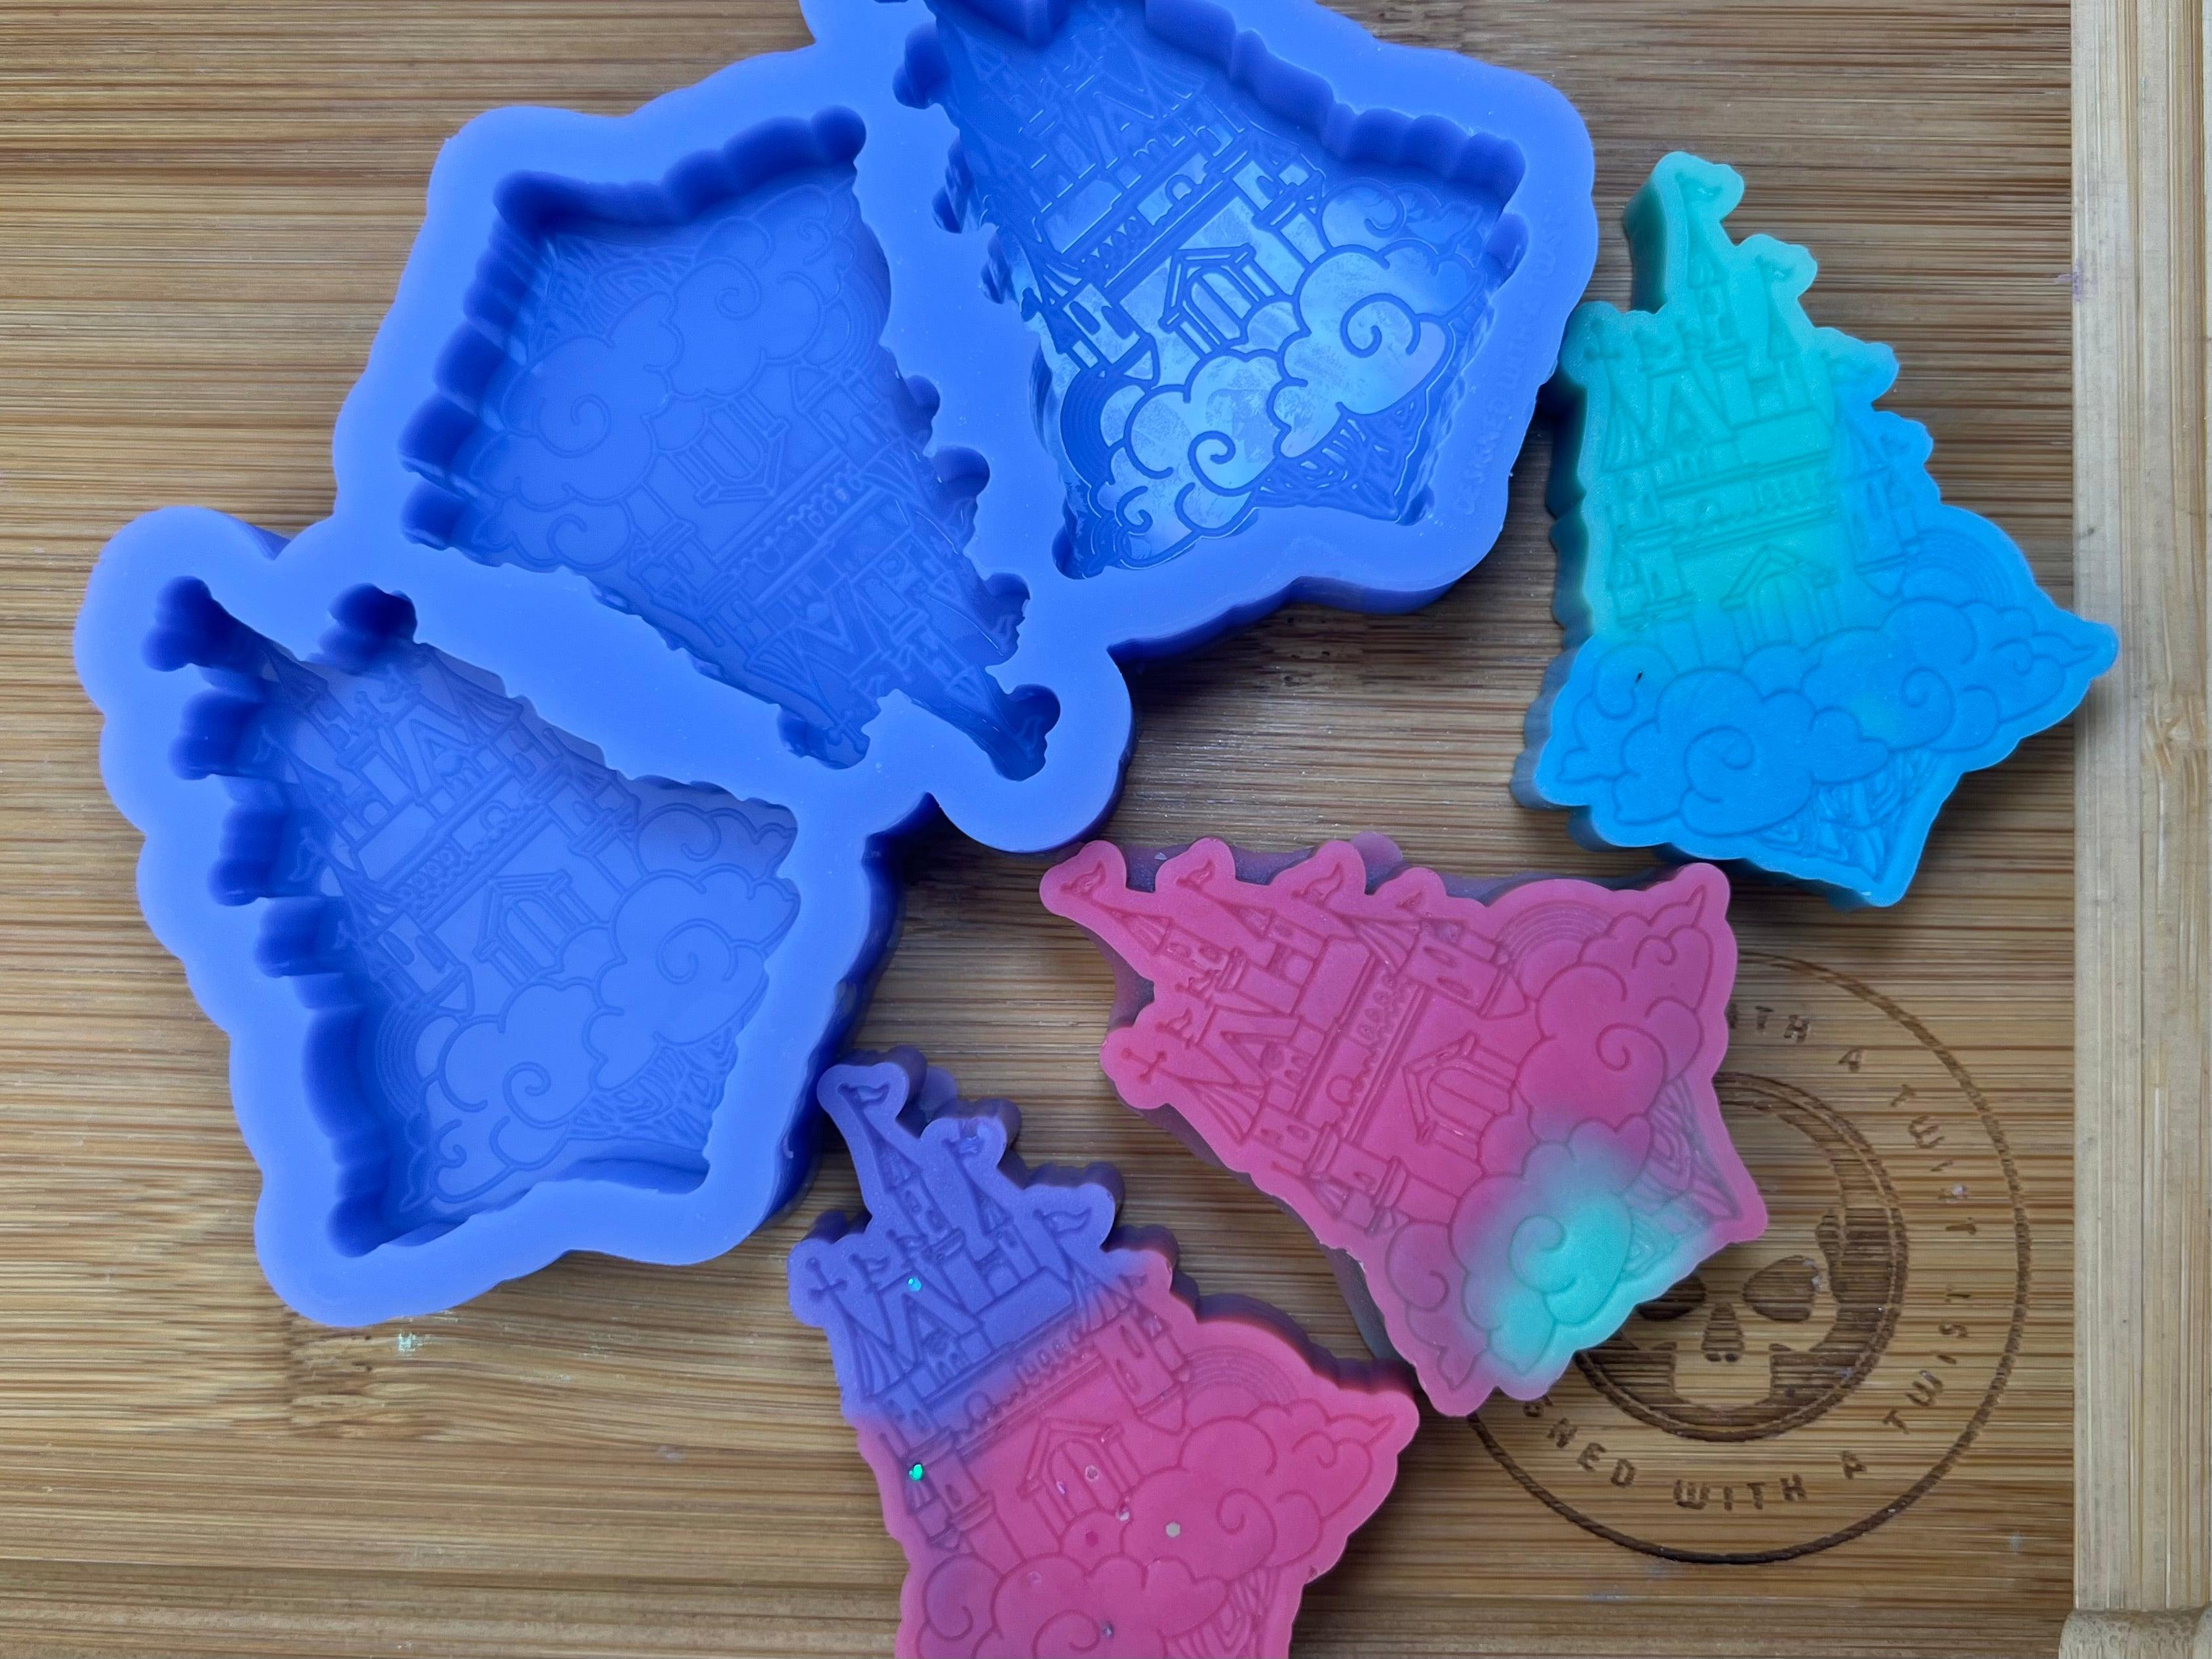 Dream Castle Wax Melt Silicone Mold - Designed with a Twist - Top quality silicone molds made in the UK.